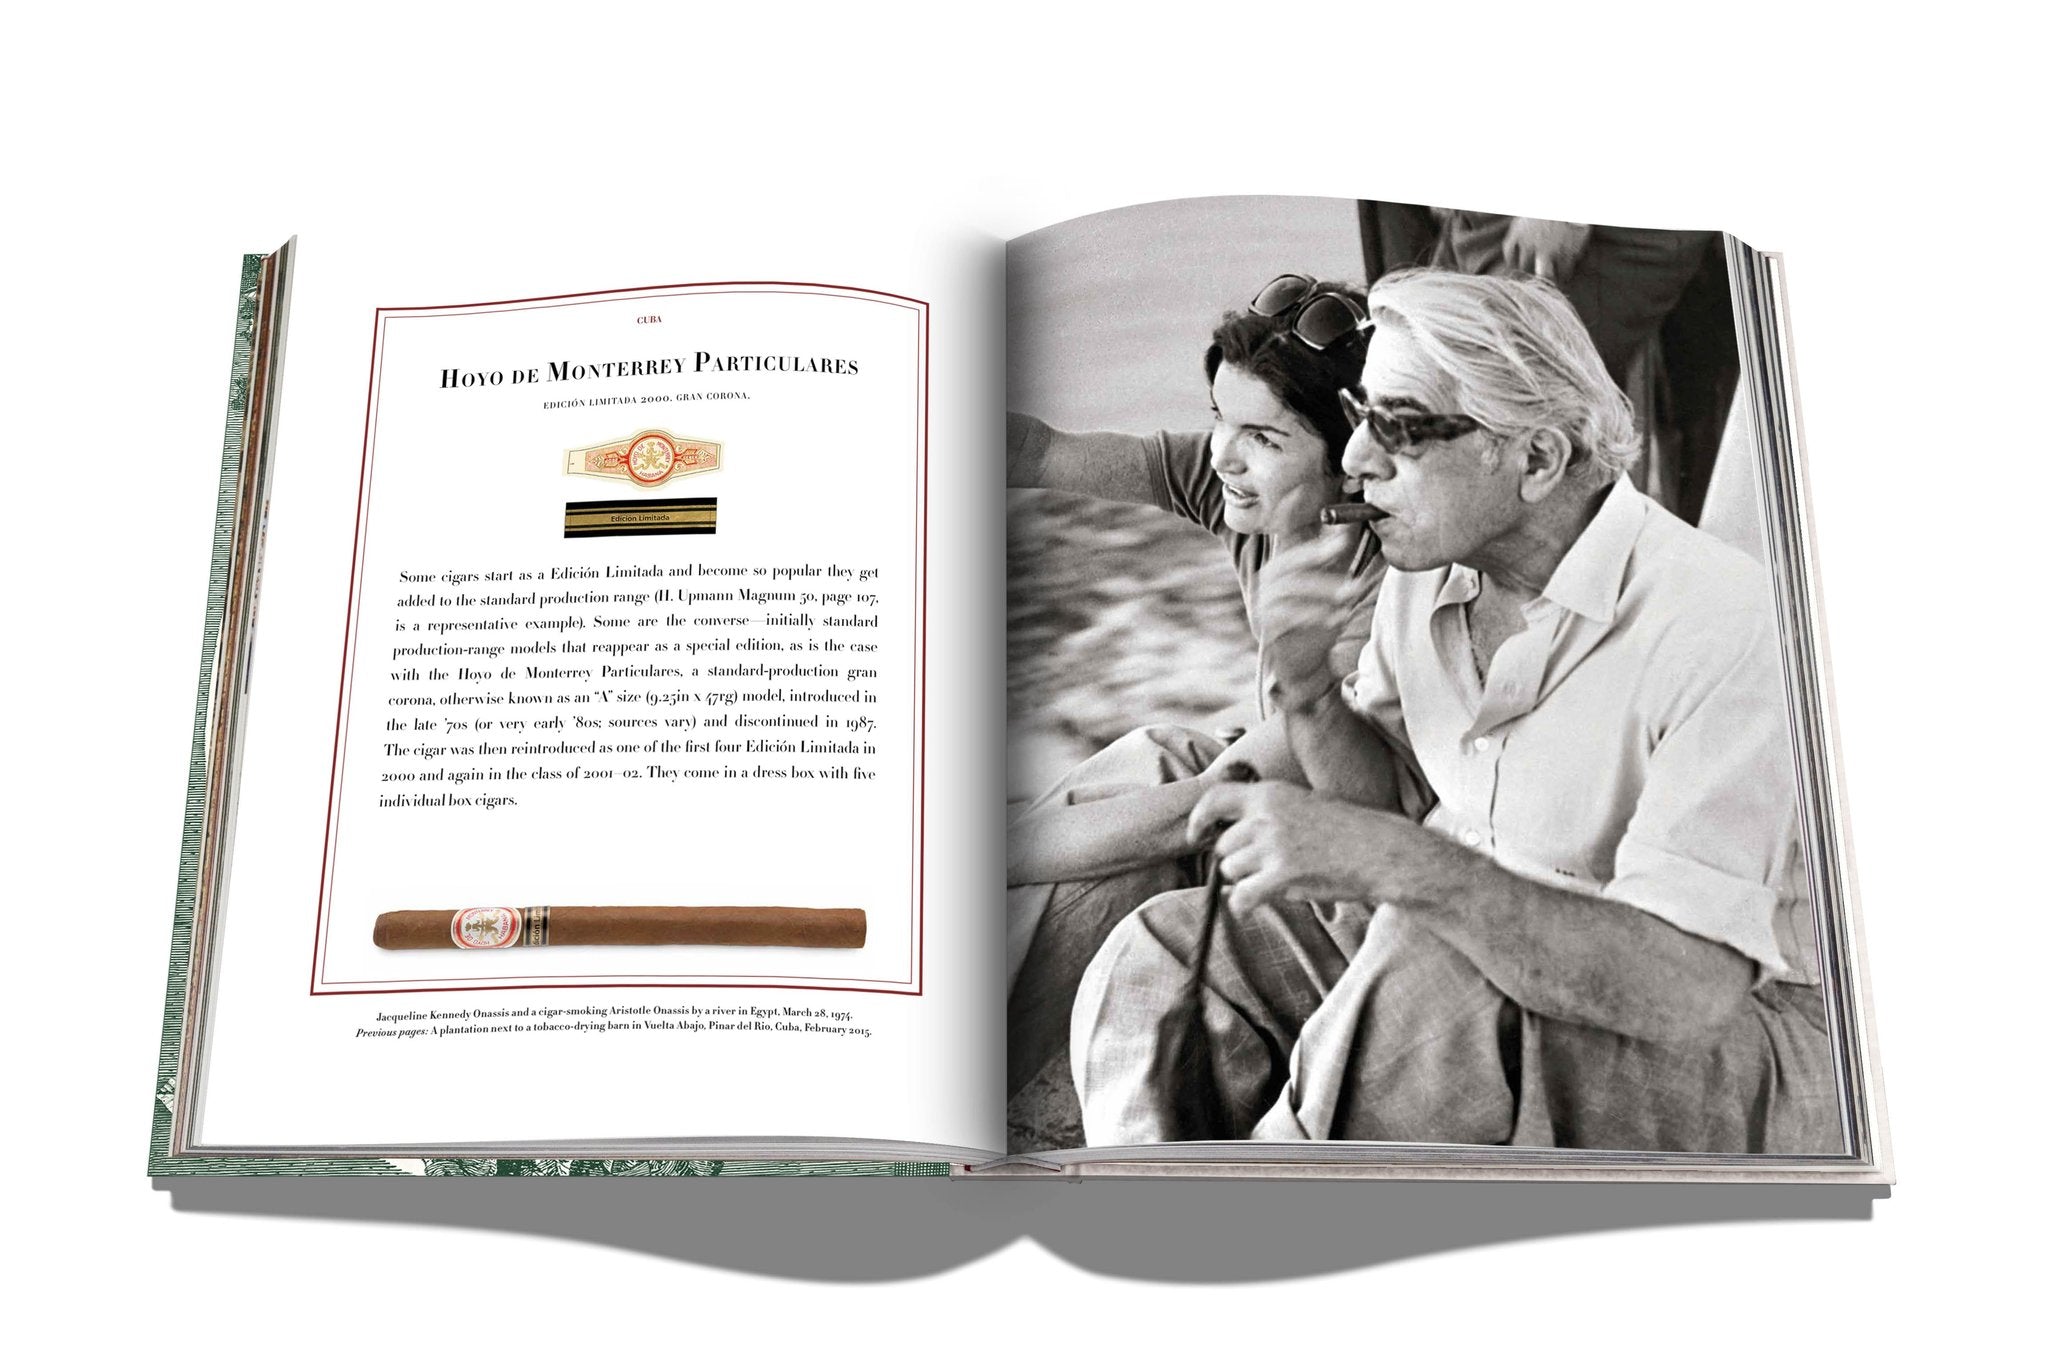 Assouline The Impossible Collection Of Cigars